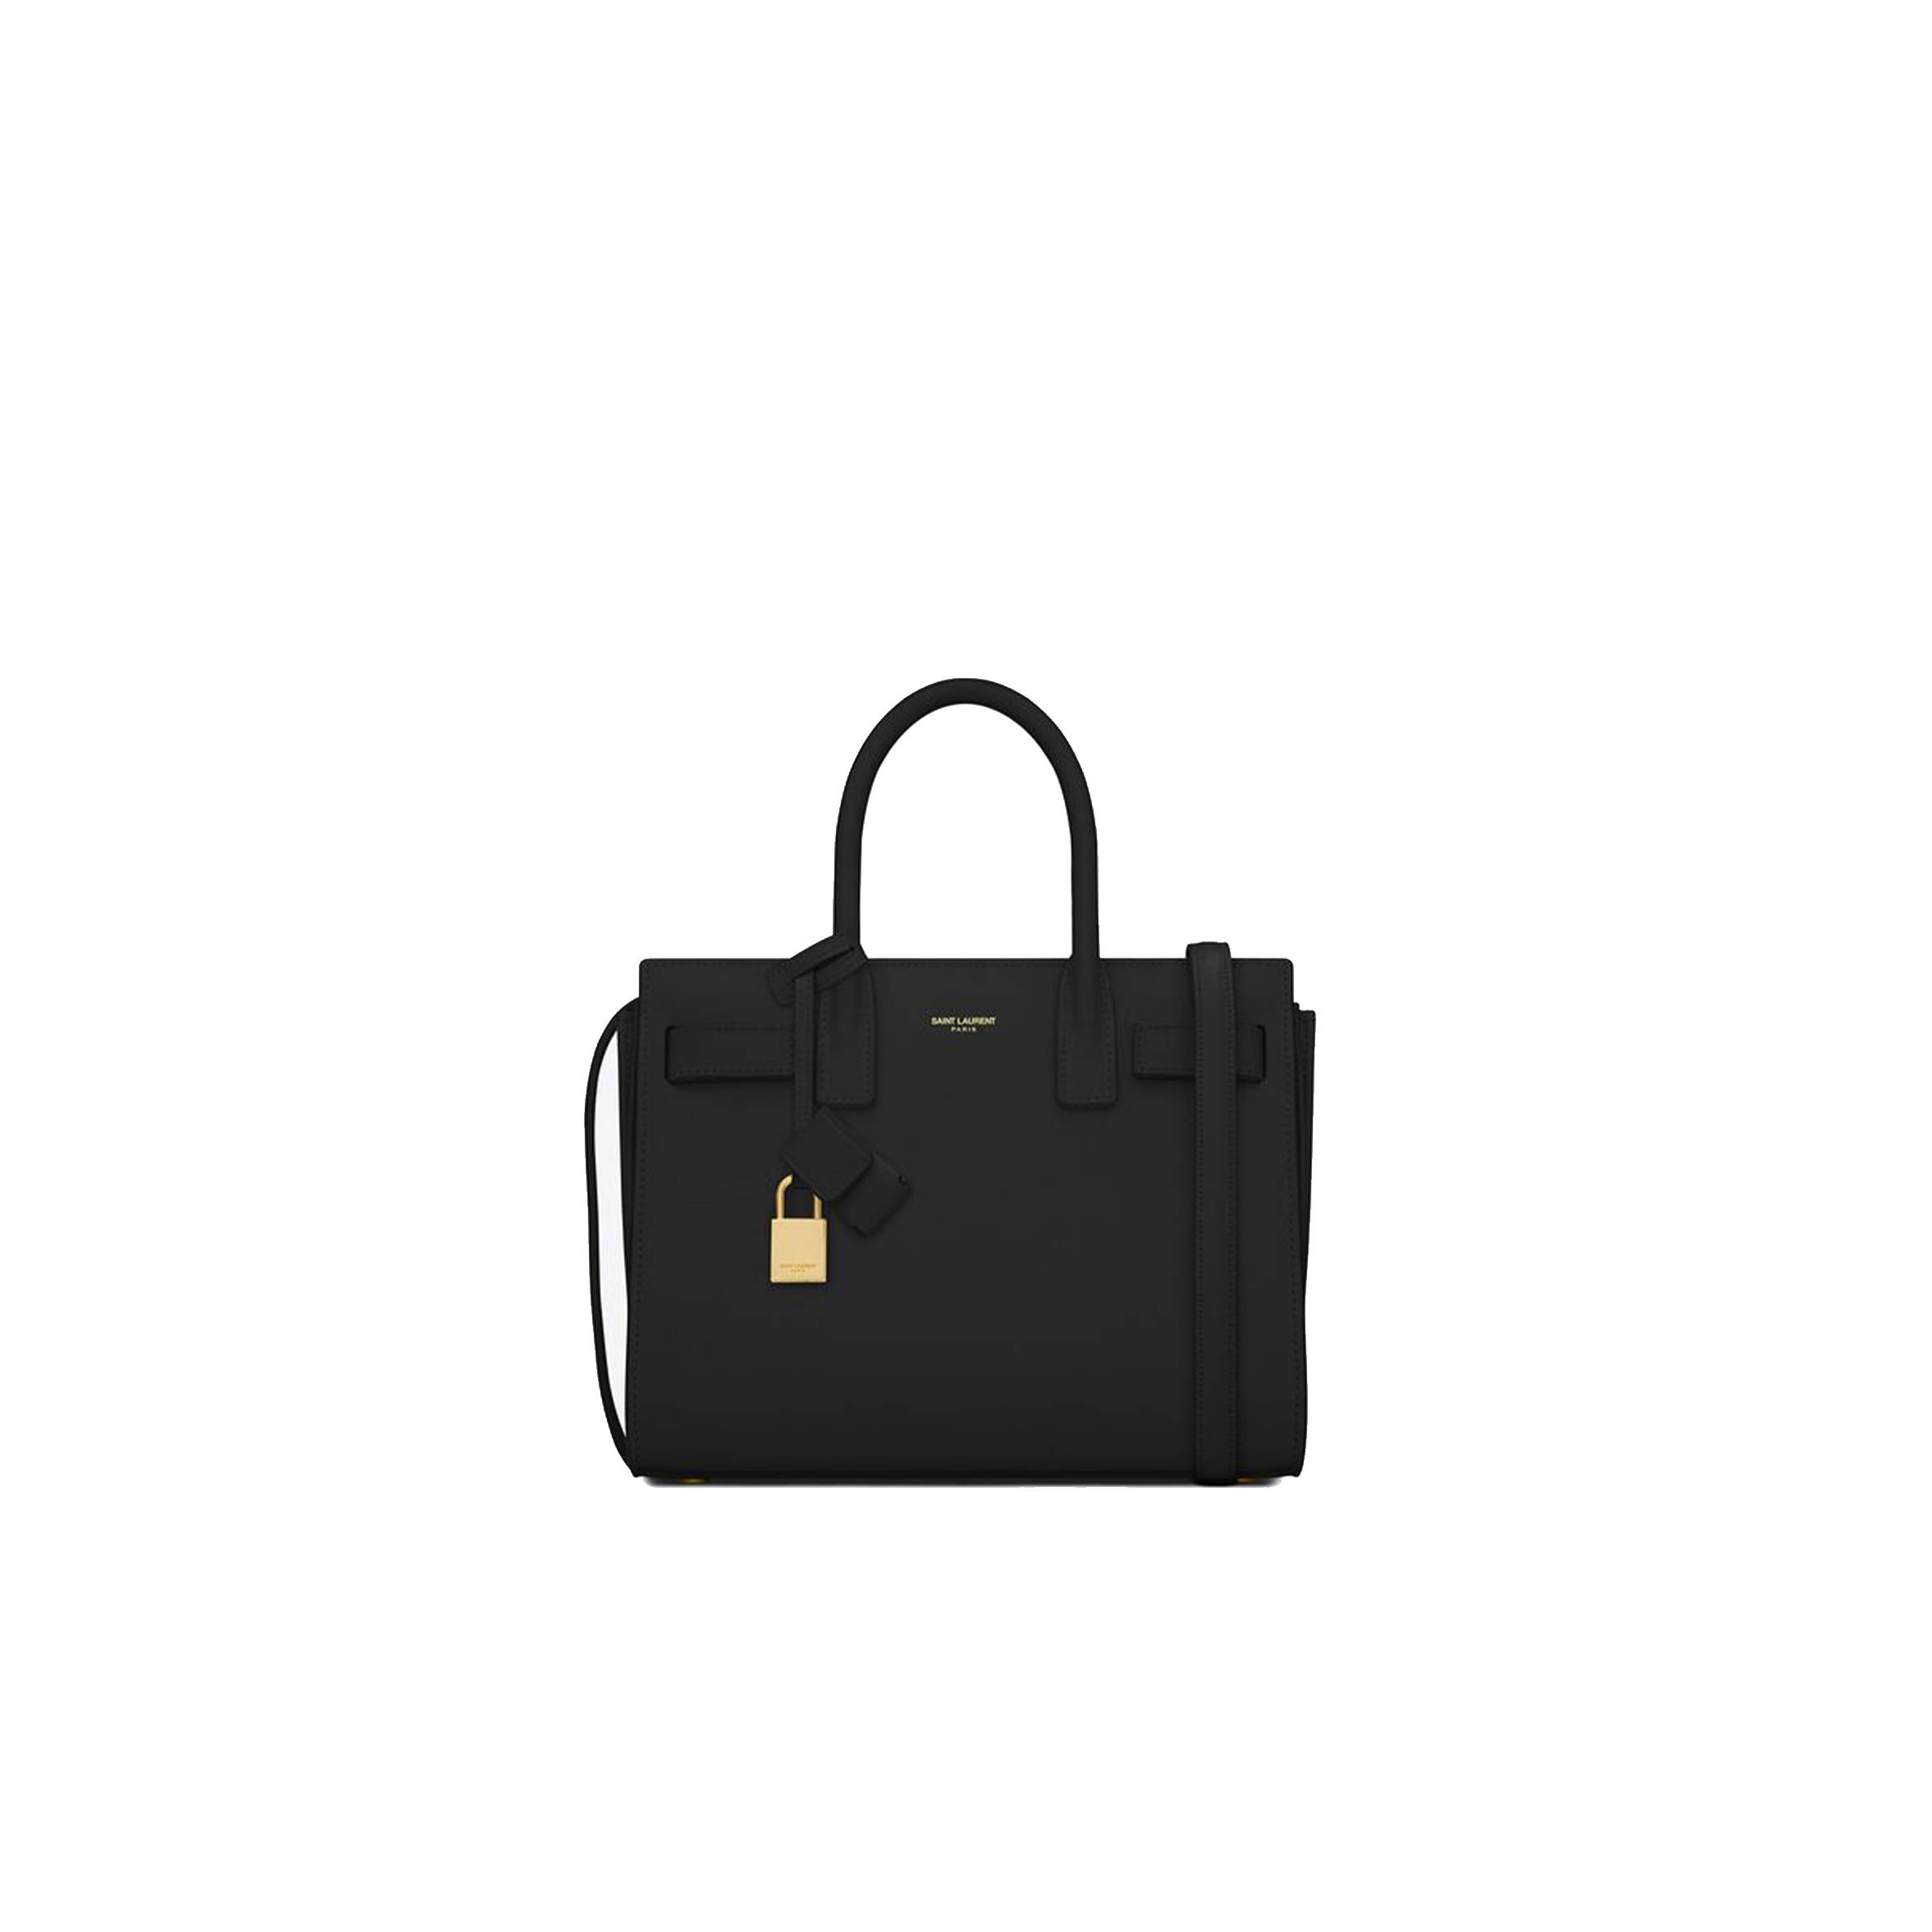 YSL SAC DE JOUR BABY IN SMOOTH LEATHER 42186302G9W1000 (26*20.5*12.5cm)